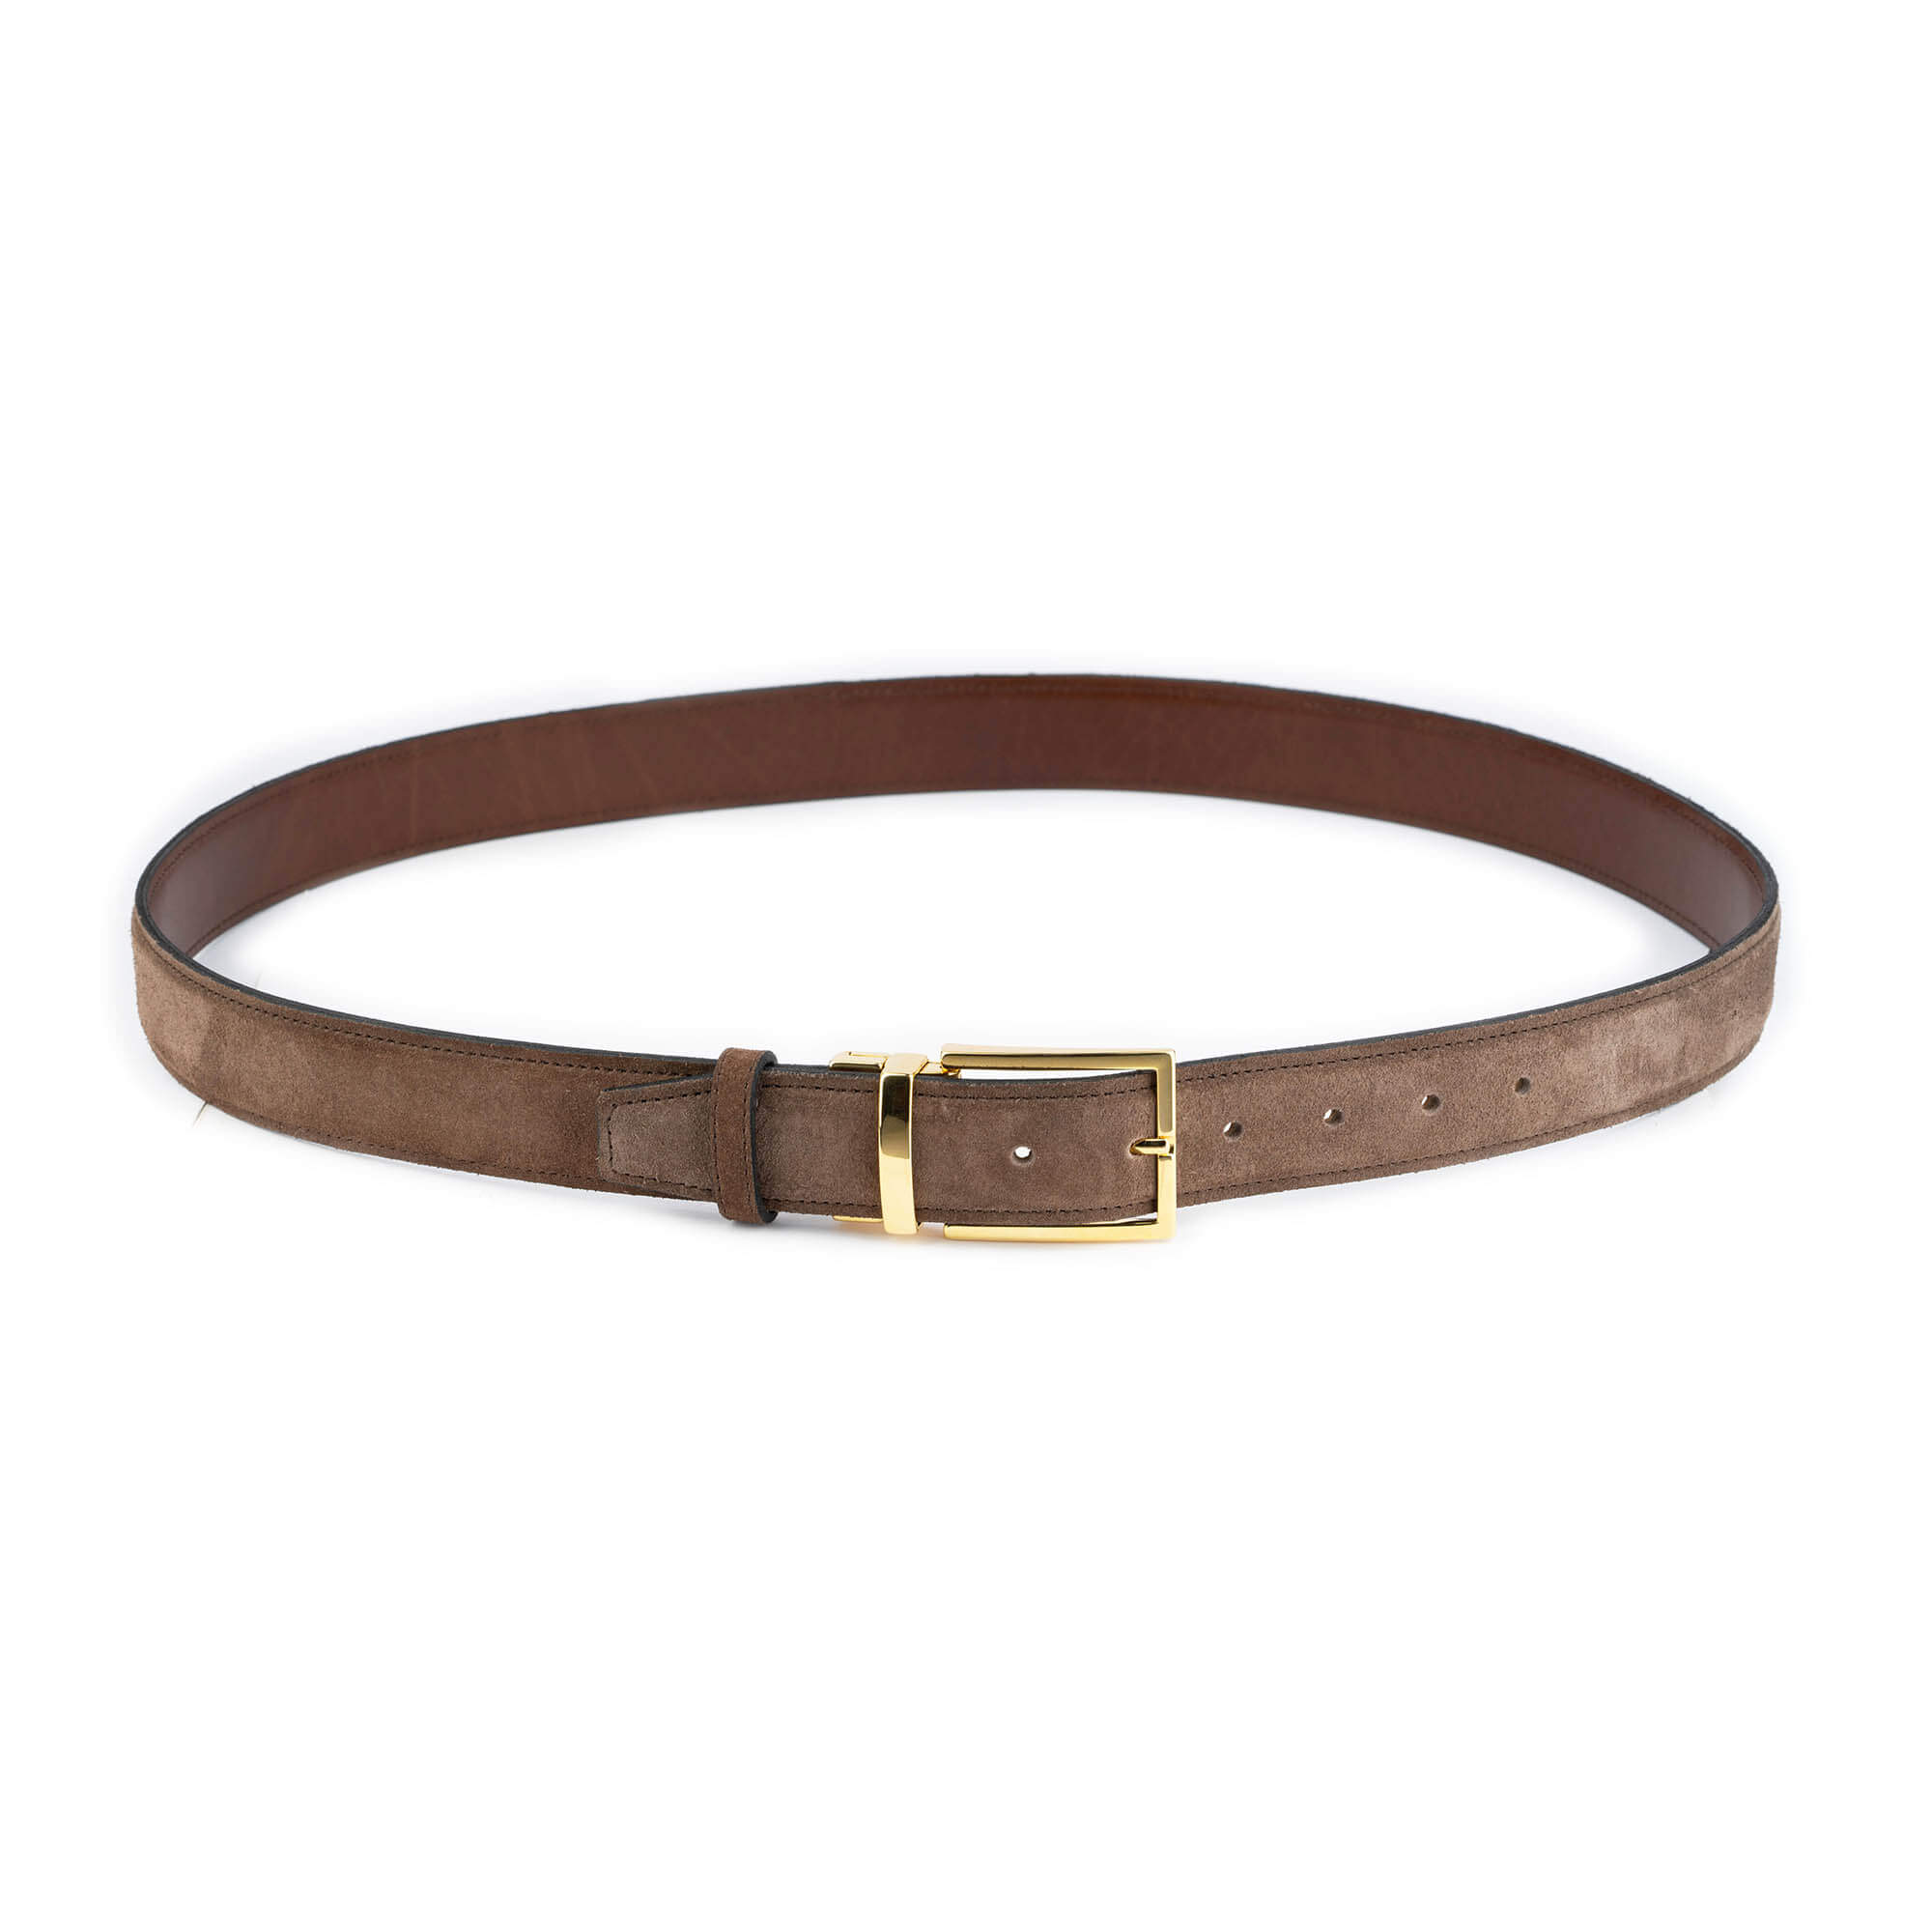 Buy Mens Taupe Brown Belt With Gold Buckle Reversible | Capo